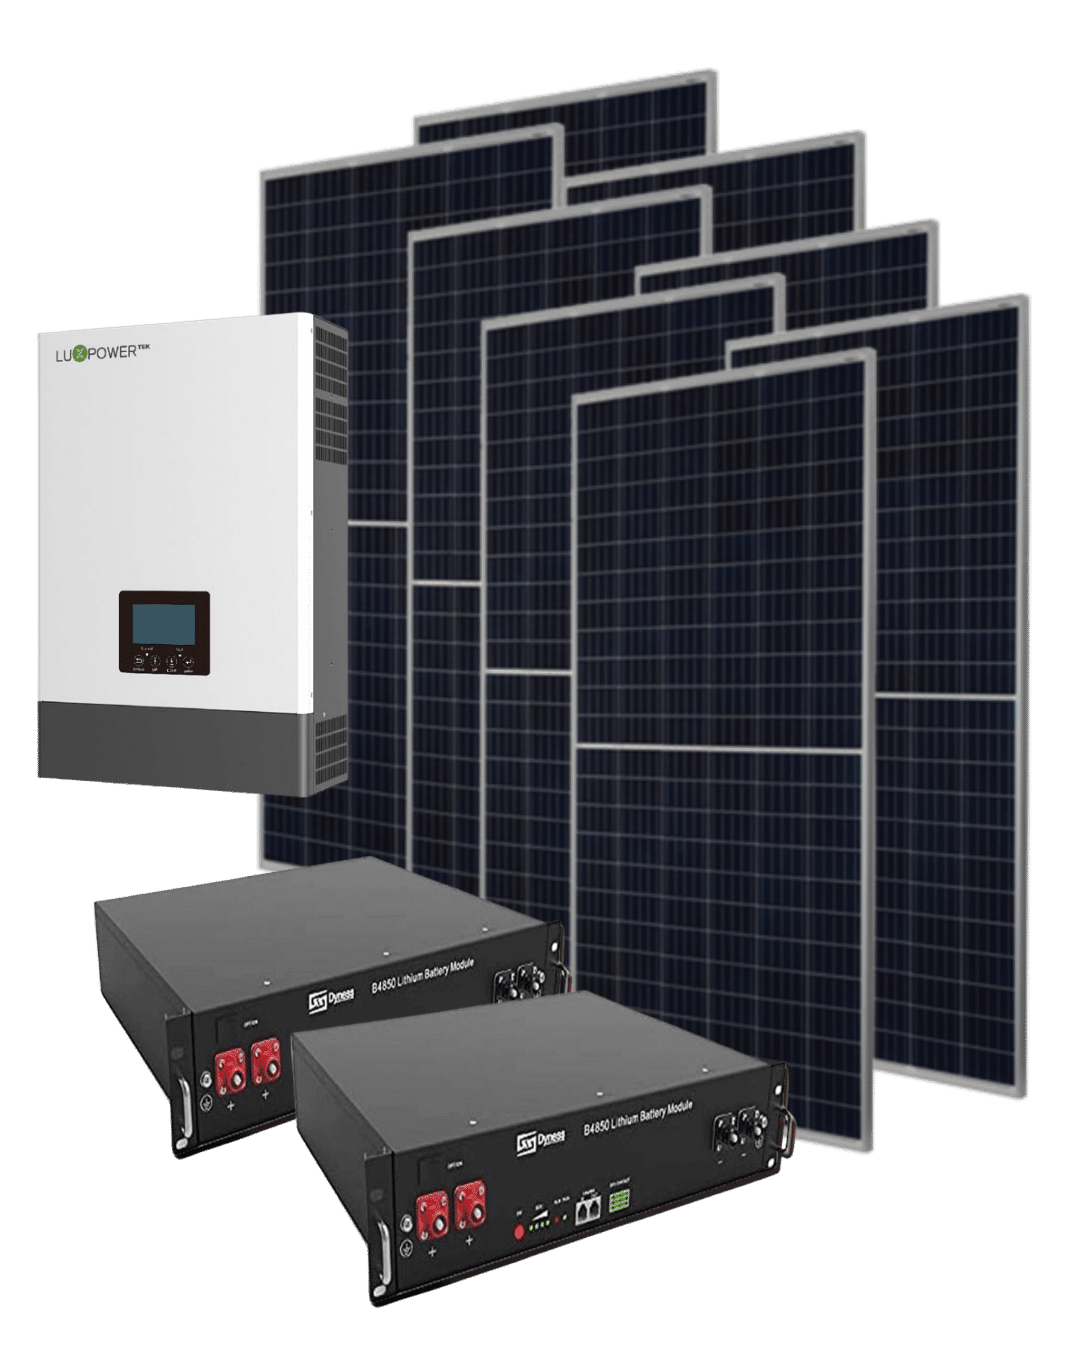 10kva inverter From Electrical Services Joburg, Buhlebethu Consulting for all your electrical service needs from   solar power, solar power near me, solar energy, solar energy near me, solar solutions, solar solutions near me, Solar Power Services, Solar Power Services near me, Solar Power Services Johannesburg, Solar Power Services Joburg, Solar Power Services Sandton, Solar Power Services Gauteng, Solar Power Services Fourways, Solar Power Solutions, Solar Power Solutions near me, Solar Power Solutions Johannesburg, Solar Power Solutions Joburg, Solar Power Solutions Sandton, Solar Power Solutions Gauteng, Solar Power Solutions Fourways, Solar Energy Services, Solar Energy Services near me, Solar Energy Services Johannesburg, Solar Energy Services Joburg, Solar Energy Services Sandton, Solar Energy Services Gauteng, Solar Energy Services Fourways, Solar Energy Solutions, Solar Energy Solutions near me, Solar Energy Solutions Johannesburg, Solar Energy Solutions Joburg, Solar Energy Solutions Sandton, Solar Energy Solutions Gauteng, Solar Energy Solutions Fourways, Loadshedding Solutions, Load Shedding Solutions, Loadshedding Solutions near me, Load Shedding Solutions near me, Loadshedding Solutions Johannesburg, Load Shedding Solutions Johannesburg, Loadshedding Solutions Joburg, Load Shedding Solutions Joburg, Solar Panels Johannesburg, Solar Panels Joburg, Solar Panels Sandton, Solar Panels Gauteng, Solar Panels Fourways, Solar Panels Near Me, Inverter, Solar Inverter, Solar Power Inverter, Solar Energy Inverter, 3kva Inverter, 5kva Inverter, 10kva Inverter, Inverter Near Me, Solar Inverter Near Me, Solar Power Inverter Near Me, Solar Energy Inverter Near Me, 3kva Inverter Near Me, 5kva Inverter Near Me, 10kva Inverter Near Me, Inverter Johannesburg, Solar Inverter Johannesburg, Solar Power Inverter Johannesburg, Solar Energy Inverter Johannesburg, 3kva Inverter Johannesburg, 5kva Inverter Johannesburg, 10kva Inverter Johannesburg, Electrical Installations, Electrical Installations near me, Electrical Installations Johannesburg, Electrical Installations Joburg, Electrical Installations Sandton, Electrical Installations Gauteng, Electrical Installations Fourways, Electrical Maintenance, Electrical Maintenance near me, Electrical Maintenance Johannesburg, Electrical Maintenance Joburg, Electrical Maintenance Sandton, Electrical Maintenance Gauteng, Electrical Maintenance Fourways, Electrical Repairs, Electrical Repairs near me, Electrical Repairs Johannesburg, Electrical Repairs Joburg, Electrical Repairs Sandton, Electrical Repairs Gauteng, Electrical Repairs Fourways, Lighting Installations, Lighting Installations near me, Lighting Installations Johannesburg, Lighting Installations Joburg, Lighting Installations Sandton, Lighting Installations Gauteng, Lighting Installations Fourways, Electrical Construction, Electrical Construction near me, Electrical Construction Johannesburg, Electrical Construction Joburg, Electrical Construction Sandton, Electrical Construction Gauteng, Electrical Construction Fourways, Electrician, Electrician near me, Electrician Johannesburg, Electrician Joburg, Electrician Sandton, Electrician Gauteng, Electrician Fourways, Electrician Service, Electrician Service near me, Electrician Service Johannesburg, Electrician Service Joburg, Electrician Service Sandton, Electrician Service Gauteng, Electrician Service Fourways